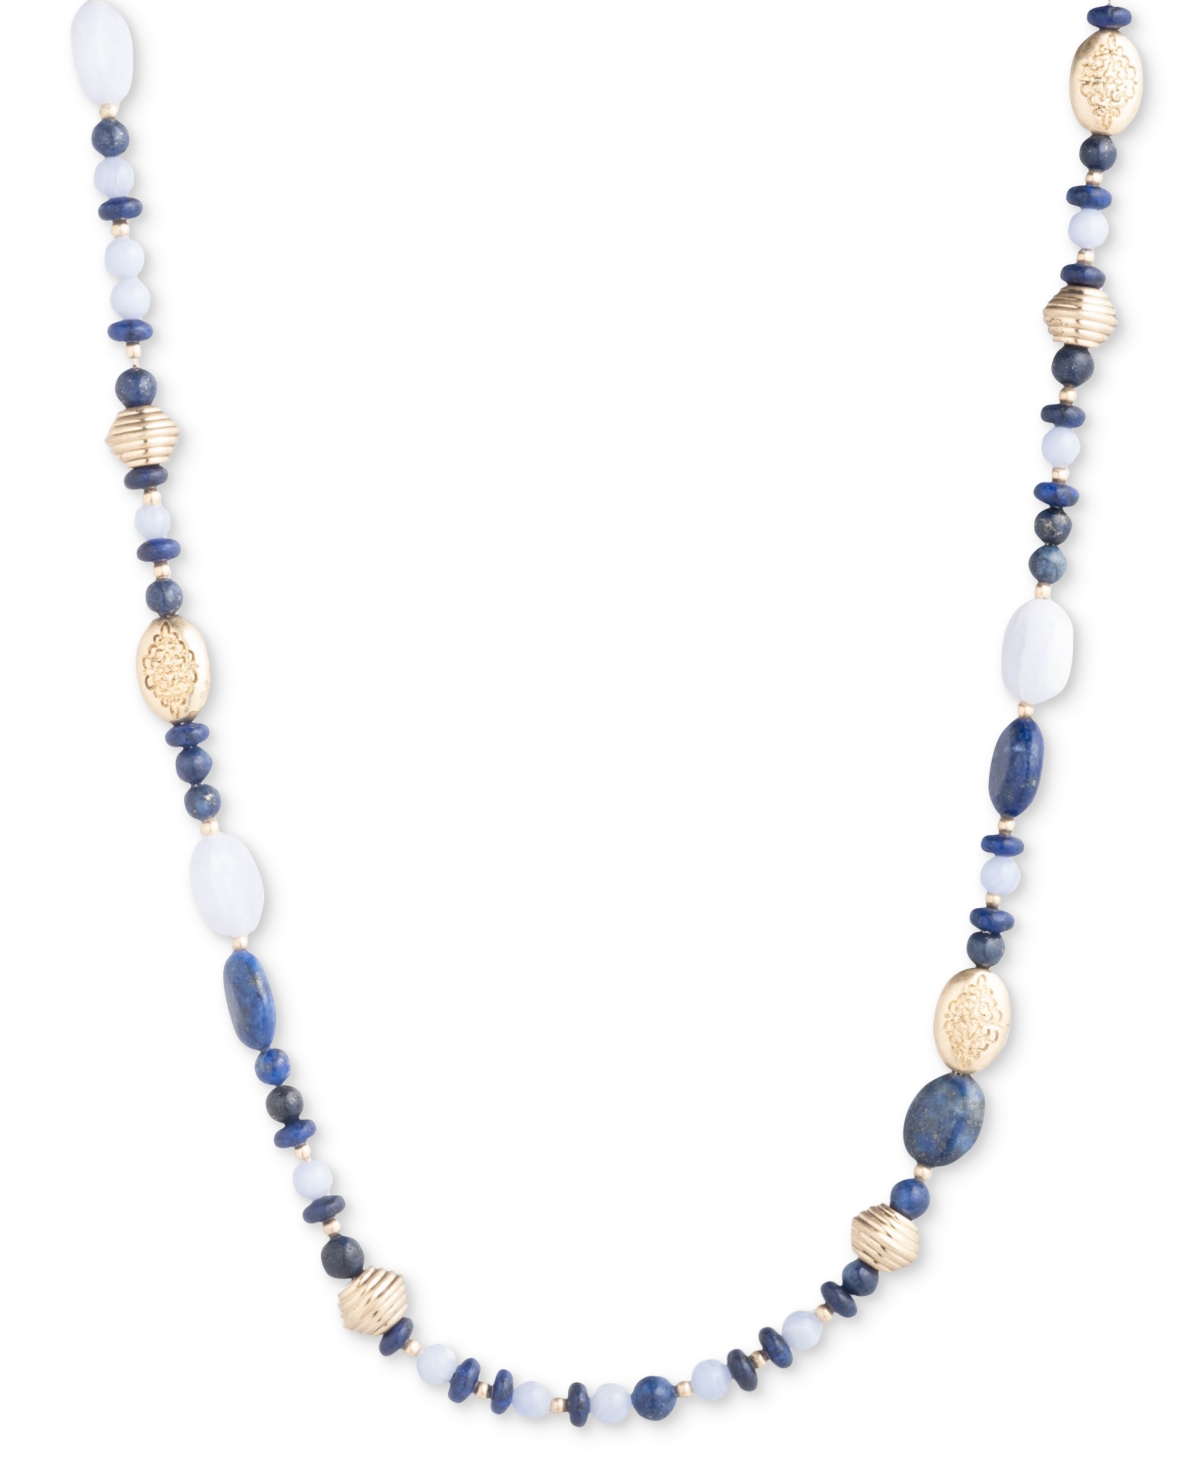 Gold-Tone Natural Stone Beaded Collar Necklace, 17" + 3" extender - Blue